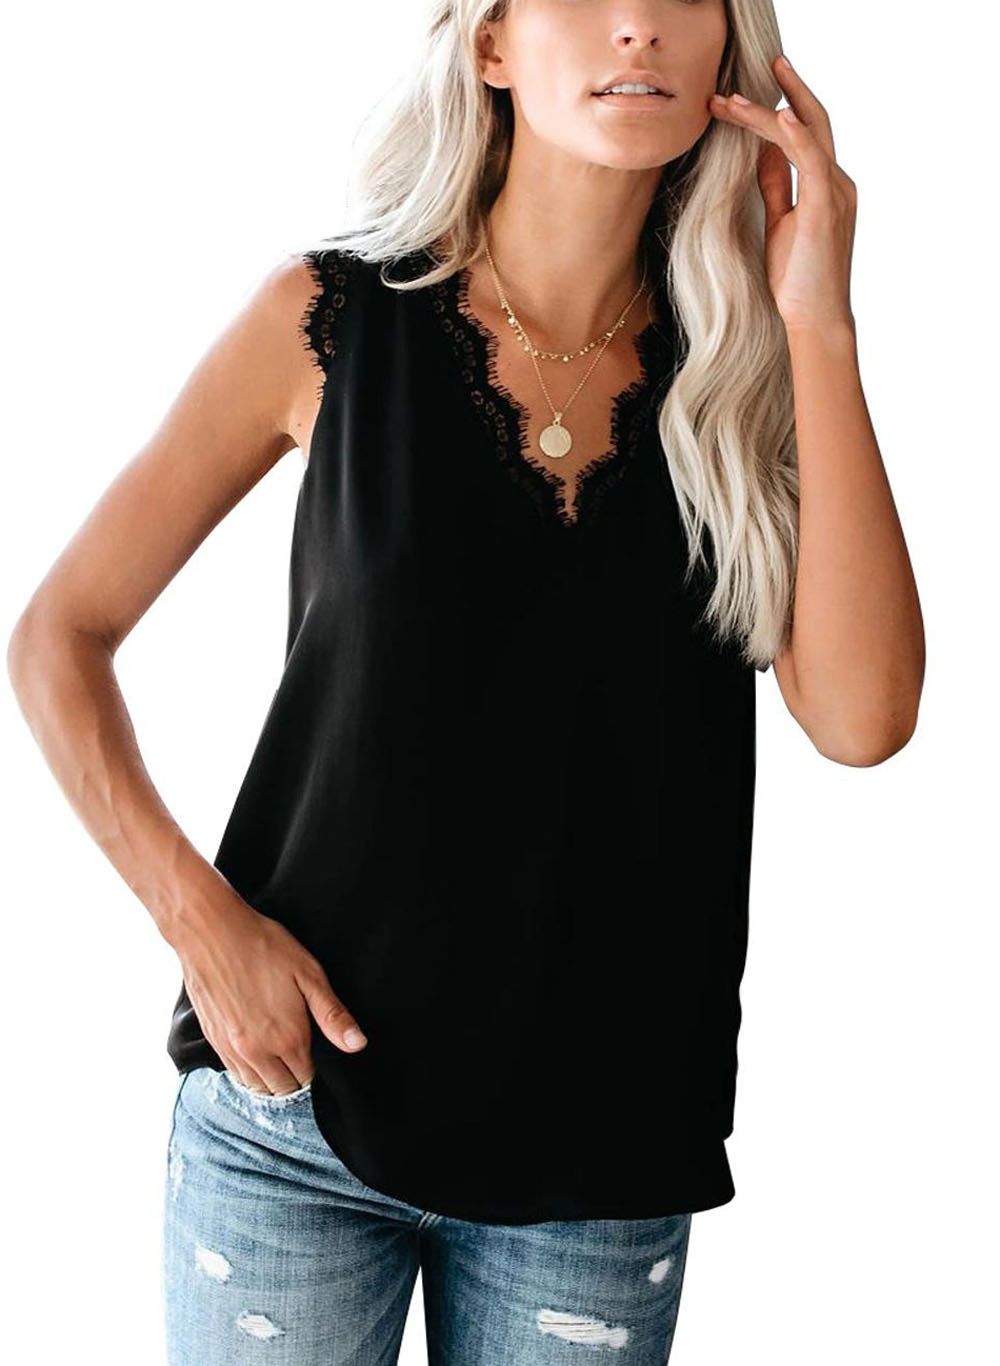 Women T-Shirt Lace Vest Sleeveless Loose Camisole Casual V-Neck Tank Tops Blouse